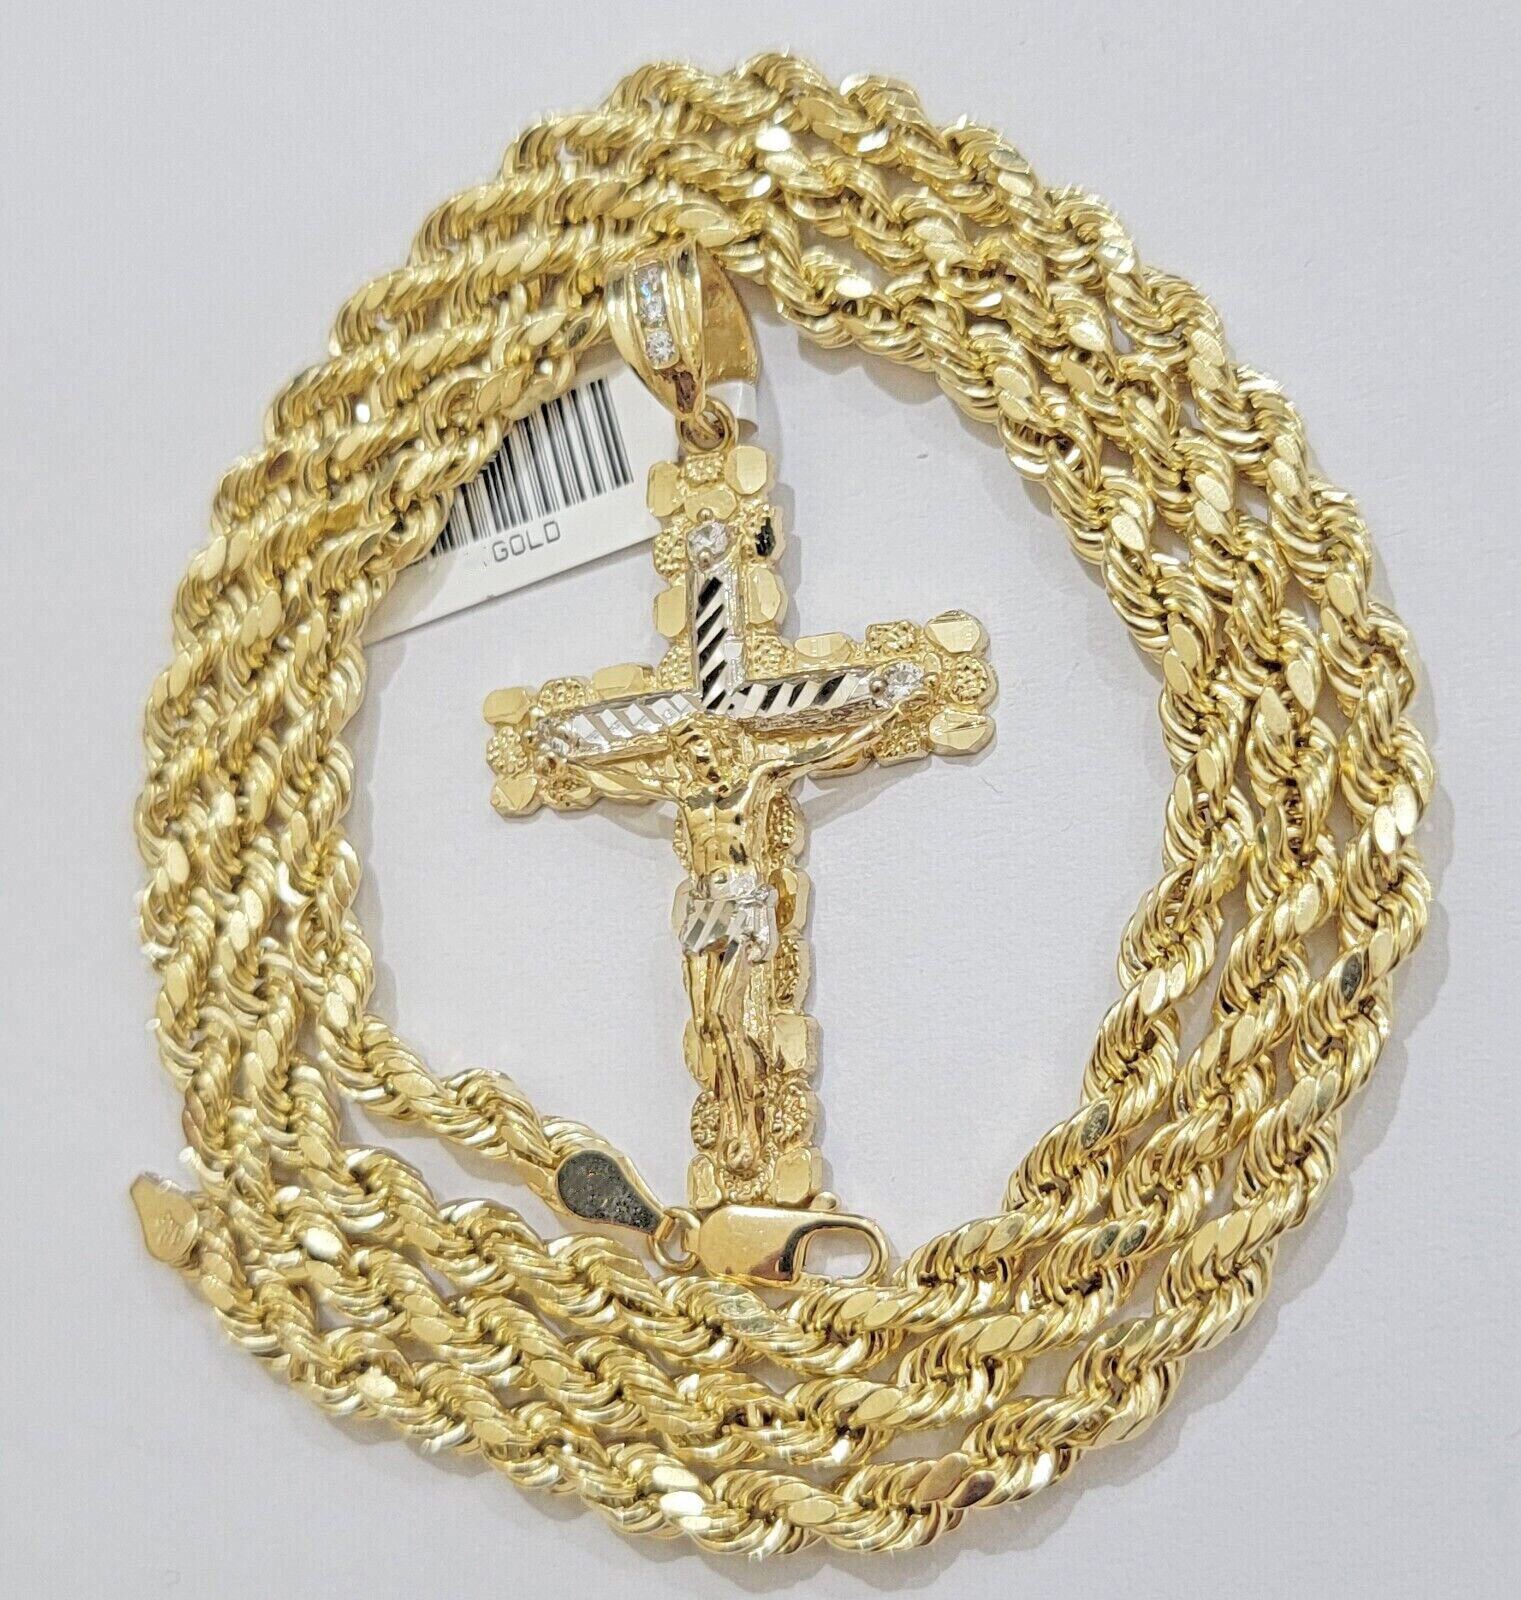 14k Gold Rope Chain Necklace Jesus Cross Charm Pendant CZ Set 18-26inch 5mm  REAL